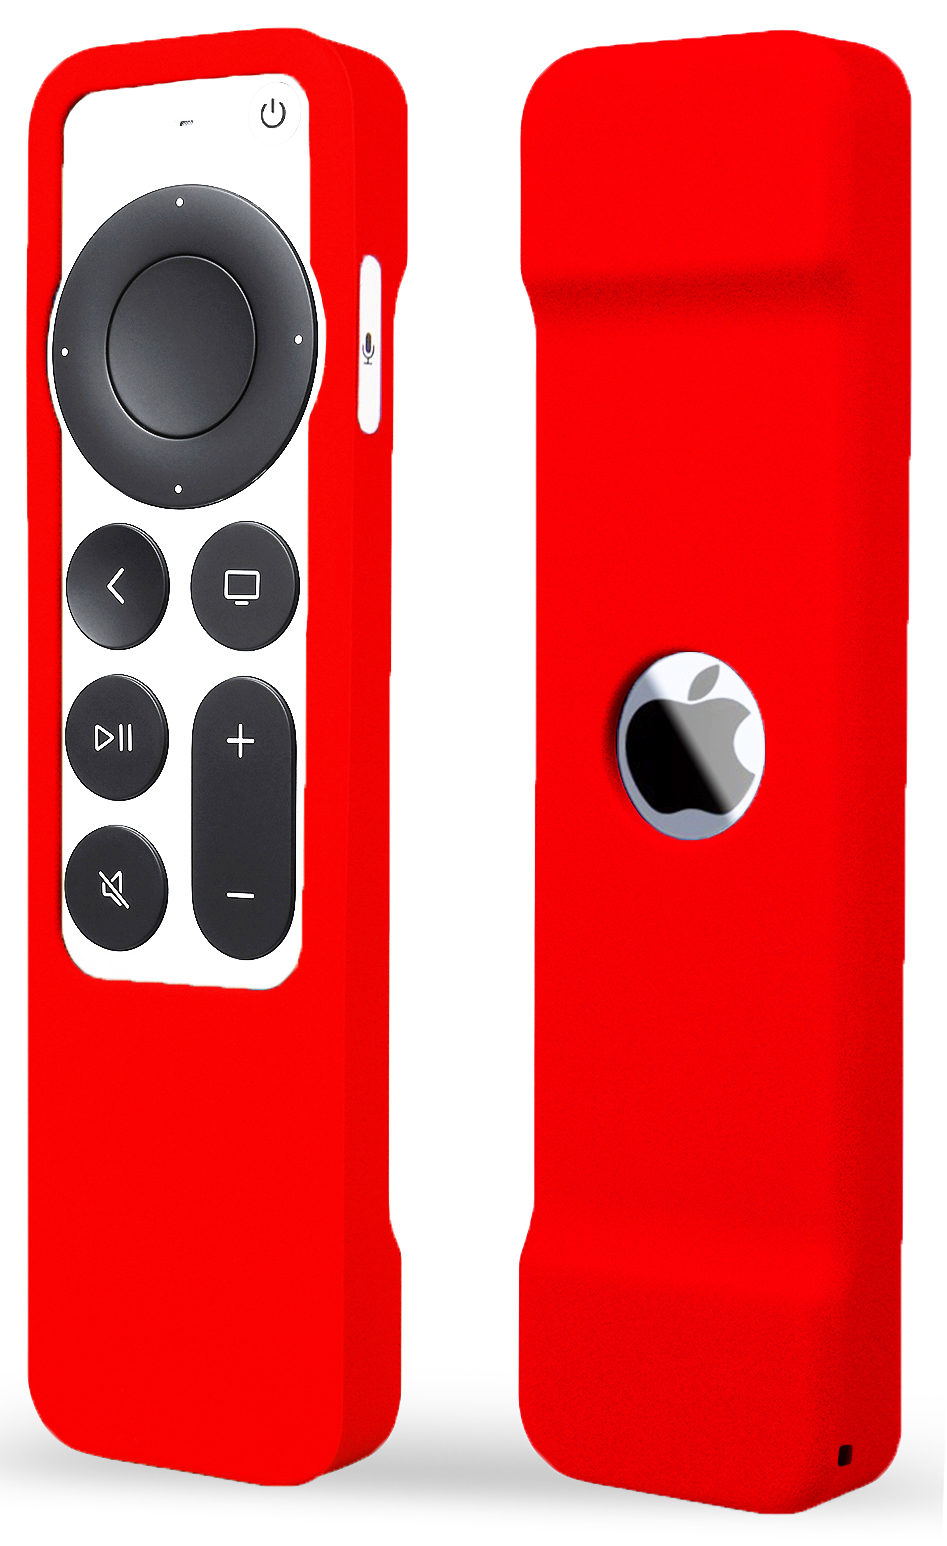 TOKERSE Silicone Case Cover for Apple TV 4K /HD 5th 2021 Siri Remote (2nd Generation) - Anti-Slip Shock Proof Soft Remote Cover Case for Apple TV 2021 4K / HD Siri Remote Controller (2nd Gen) - Red